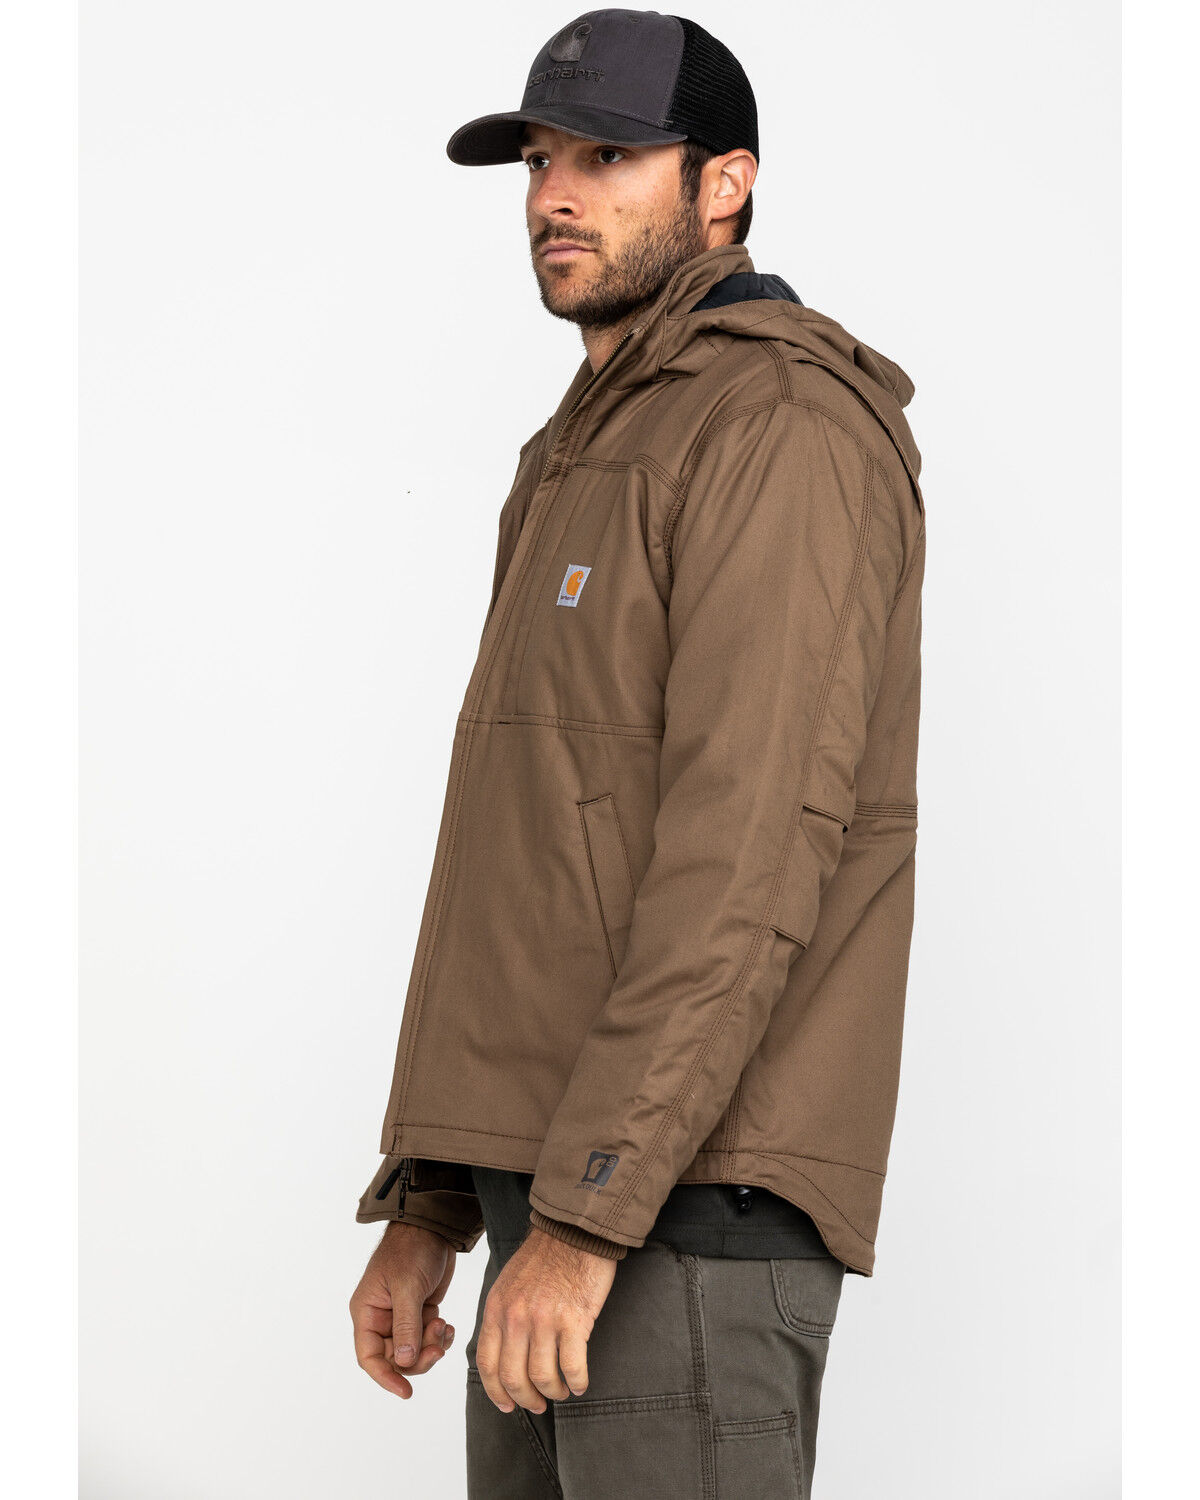 Regular and Big & Tall Sizes Work Utility Outerwear Carhartt Mens Full Swing Cryder